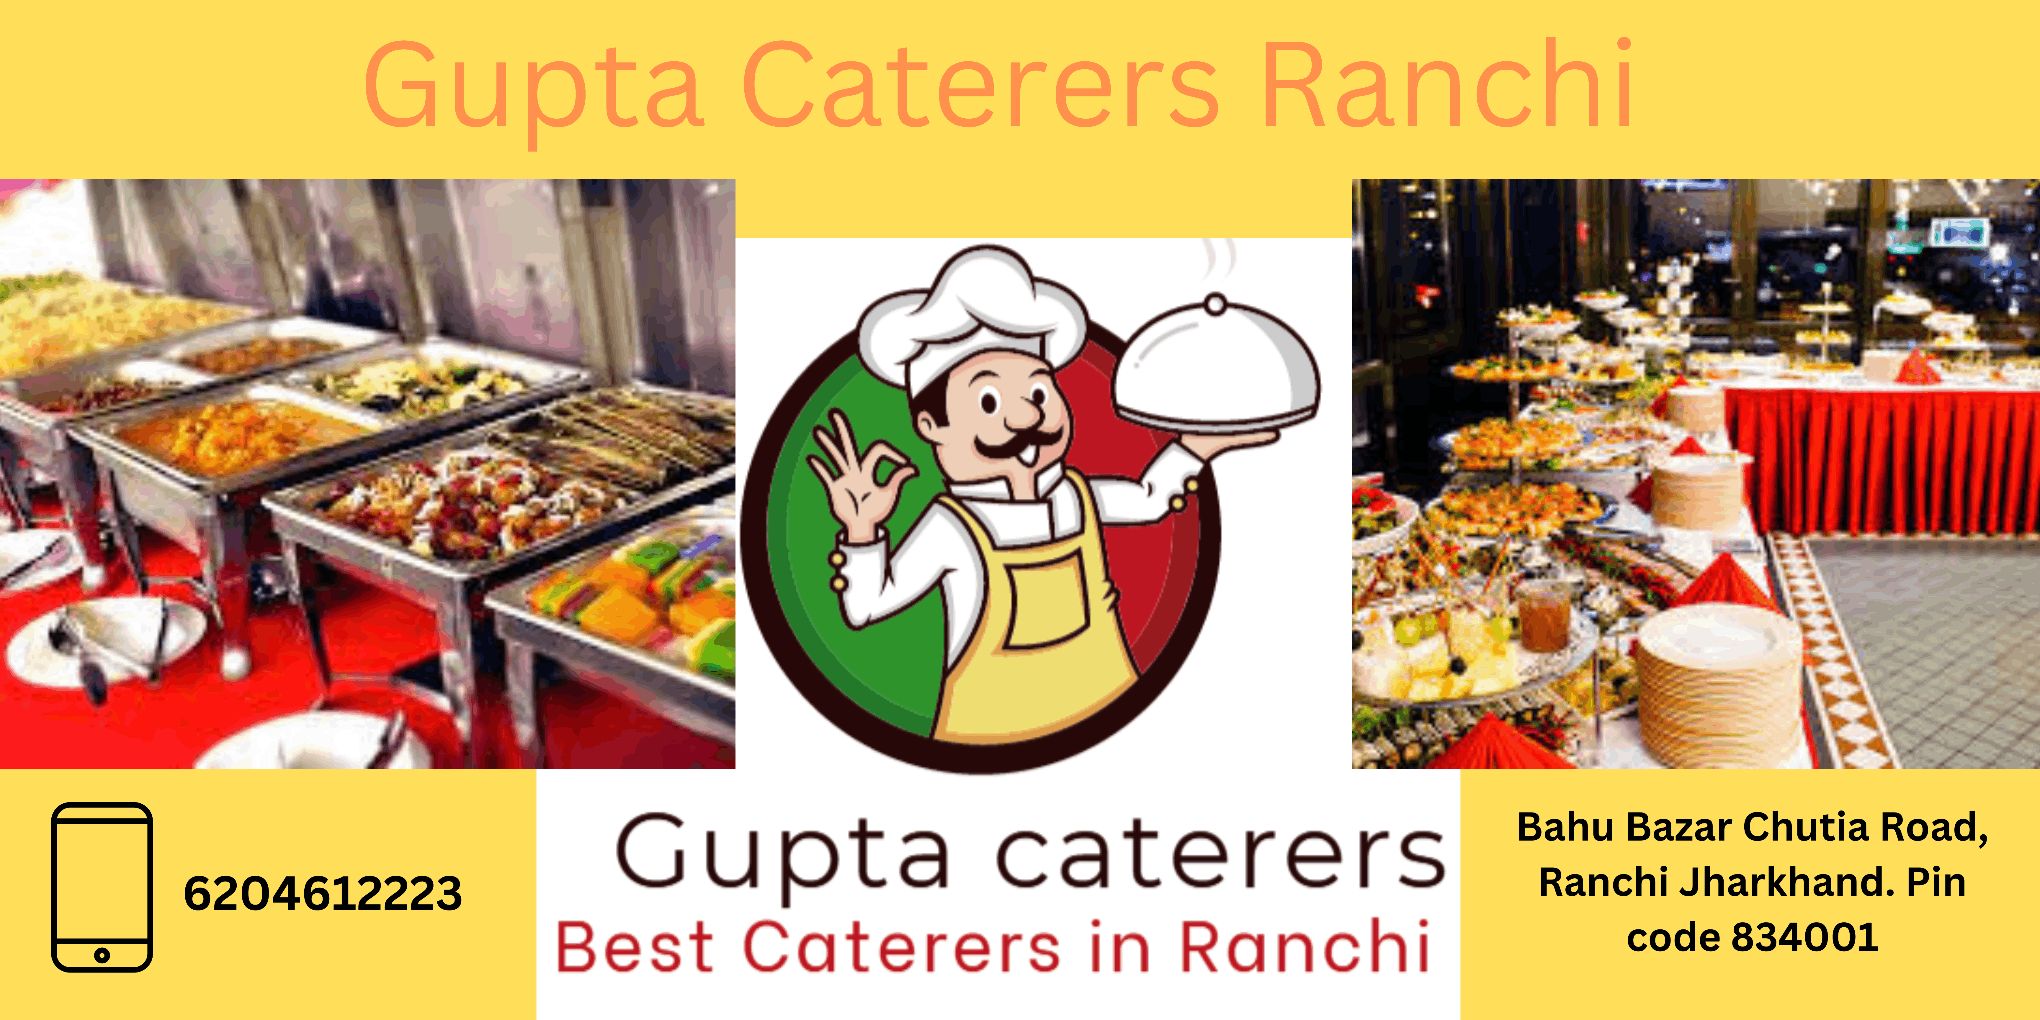  Best Caterers in Ranchi